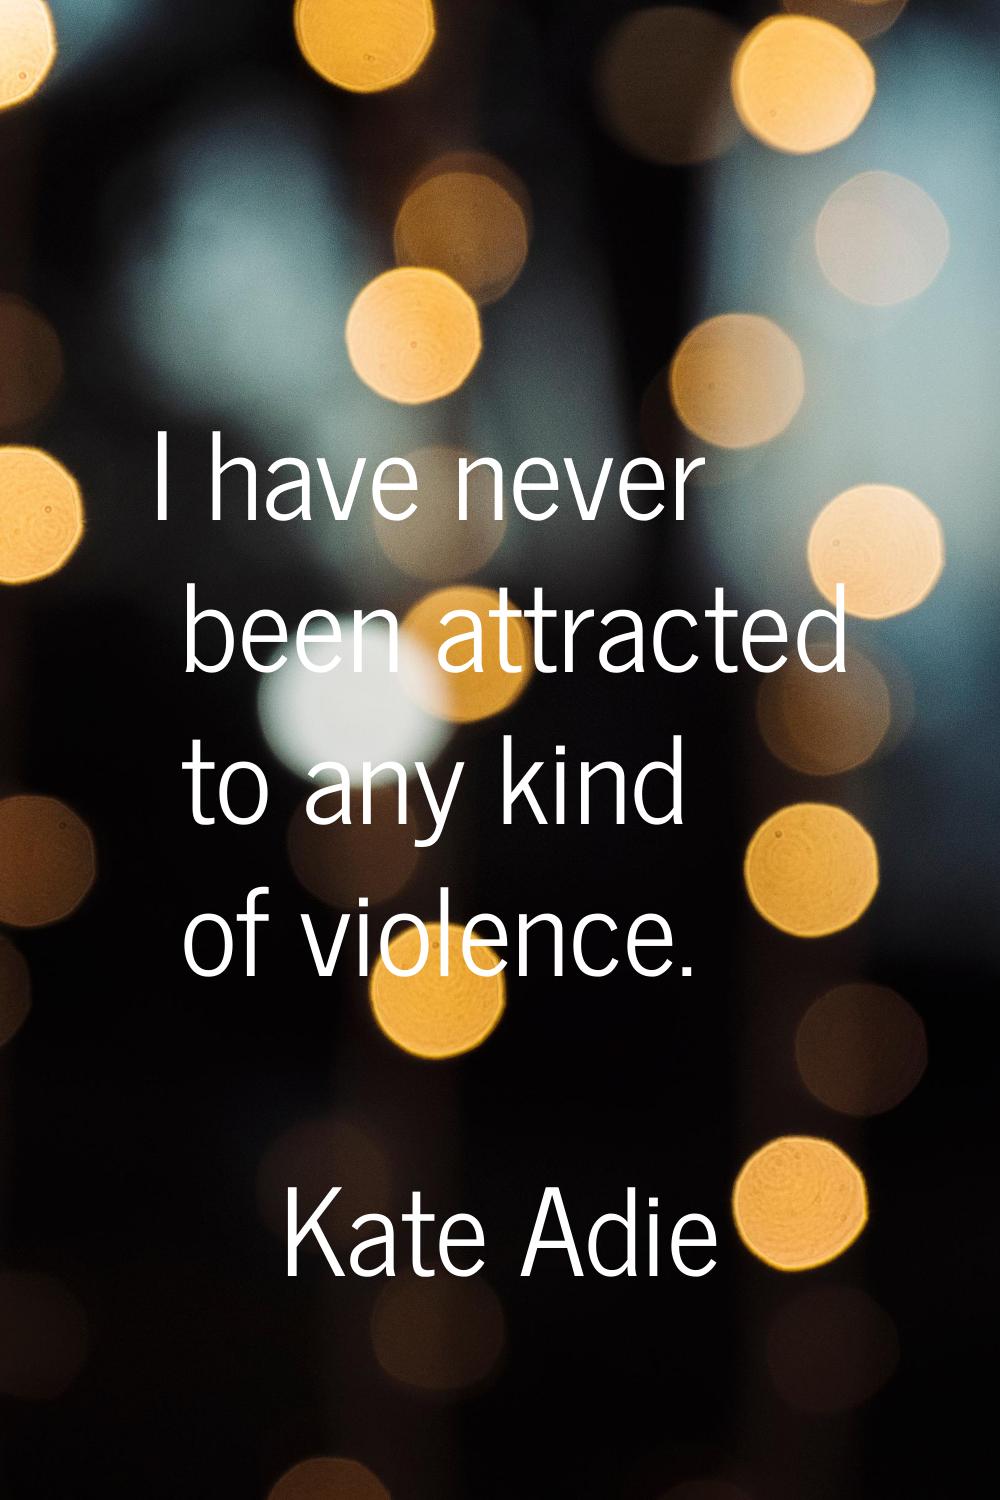 I have never been attracted to any kind of violence.